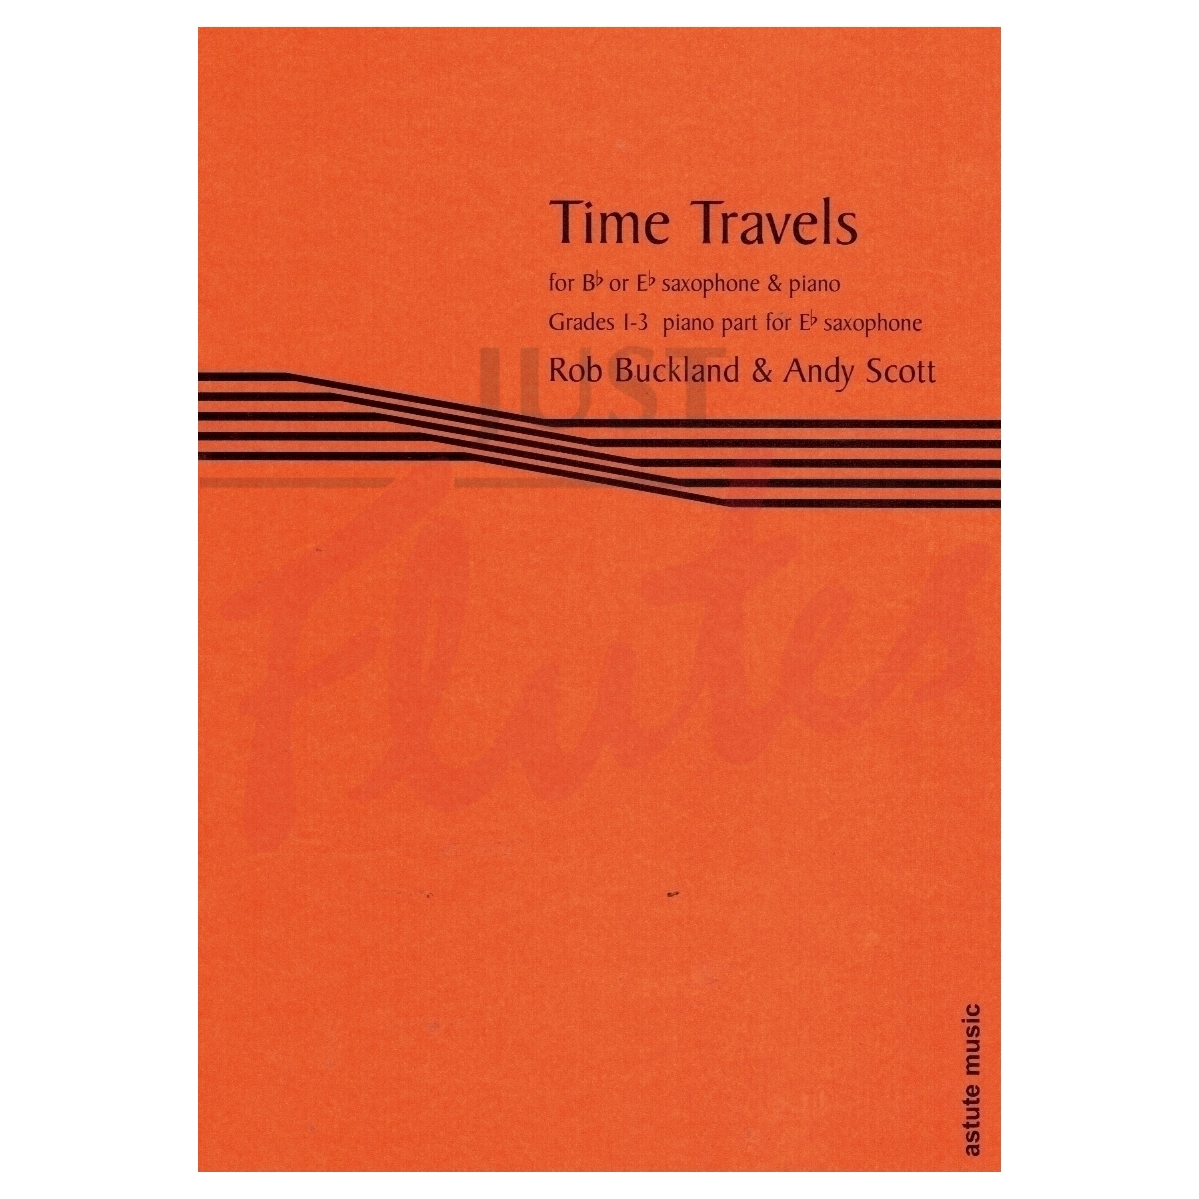 Time Travels - Piano Accompaniment for Eb Saxophone